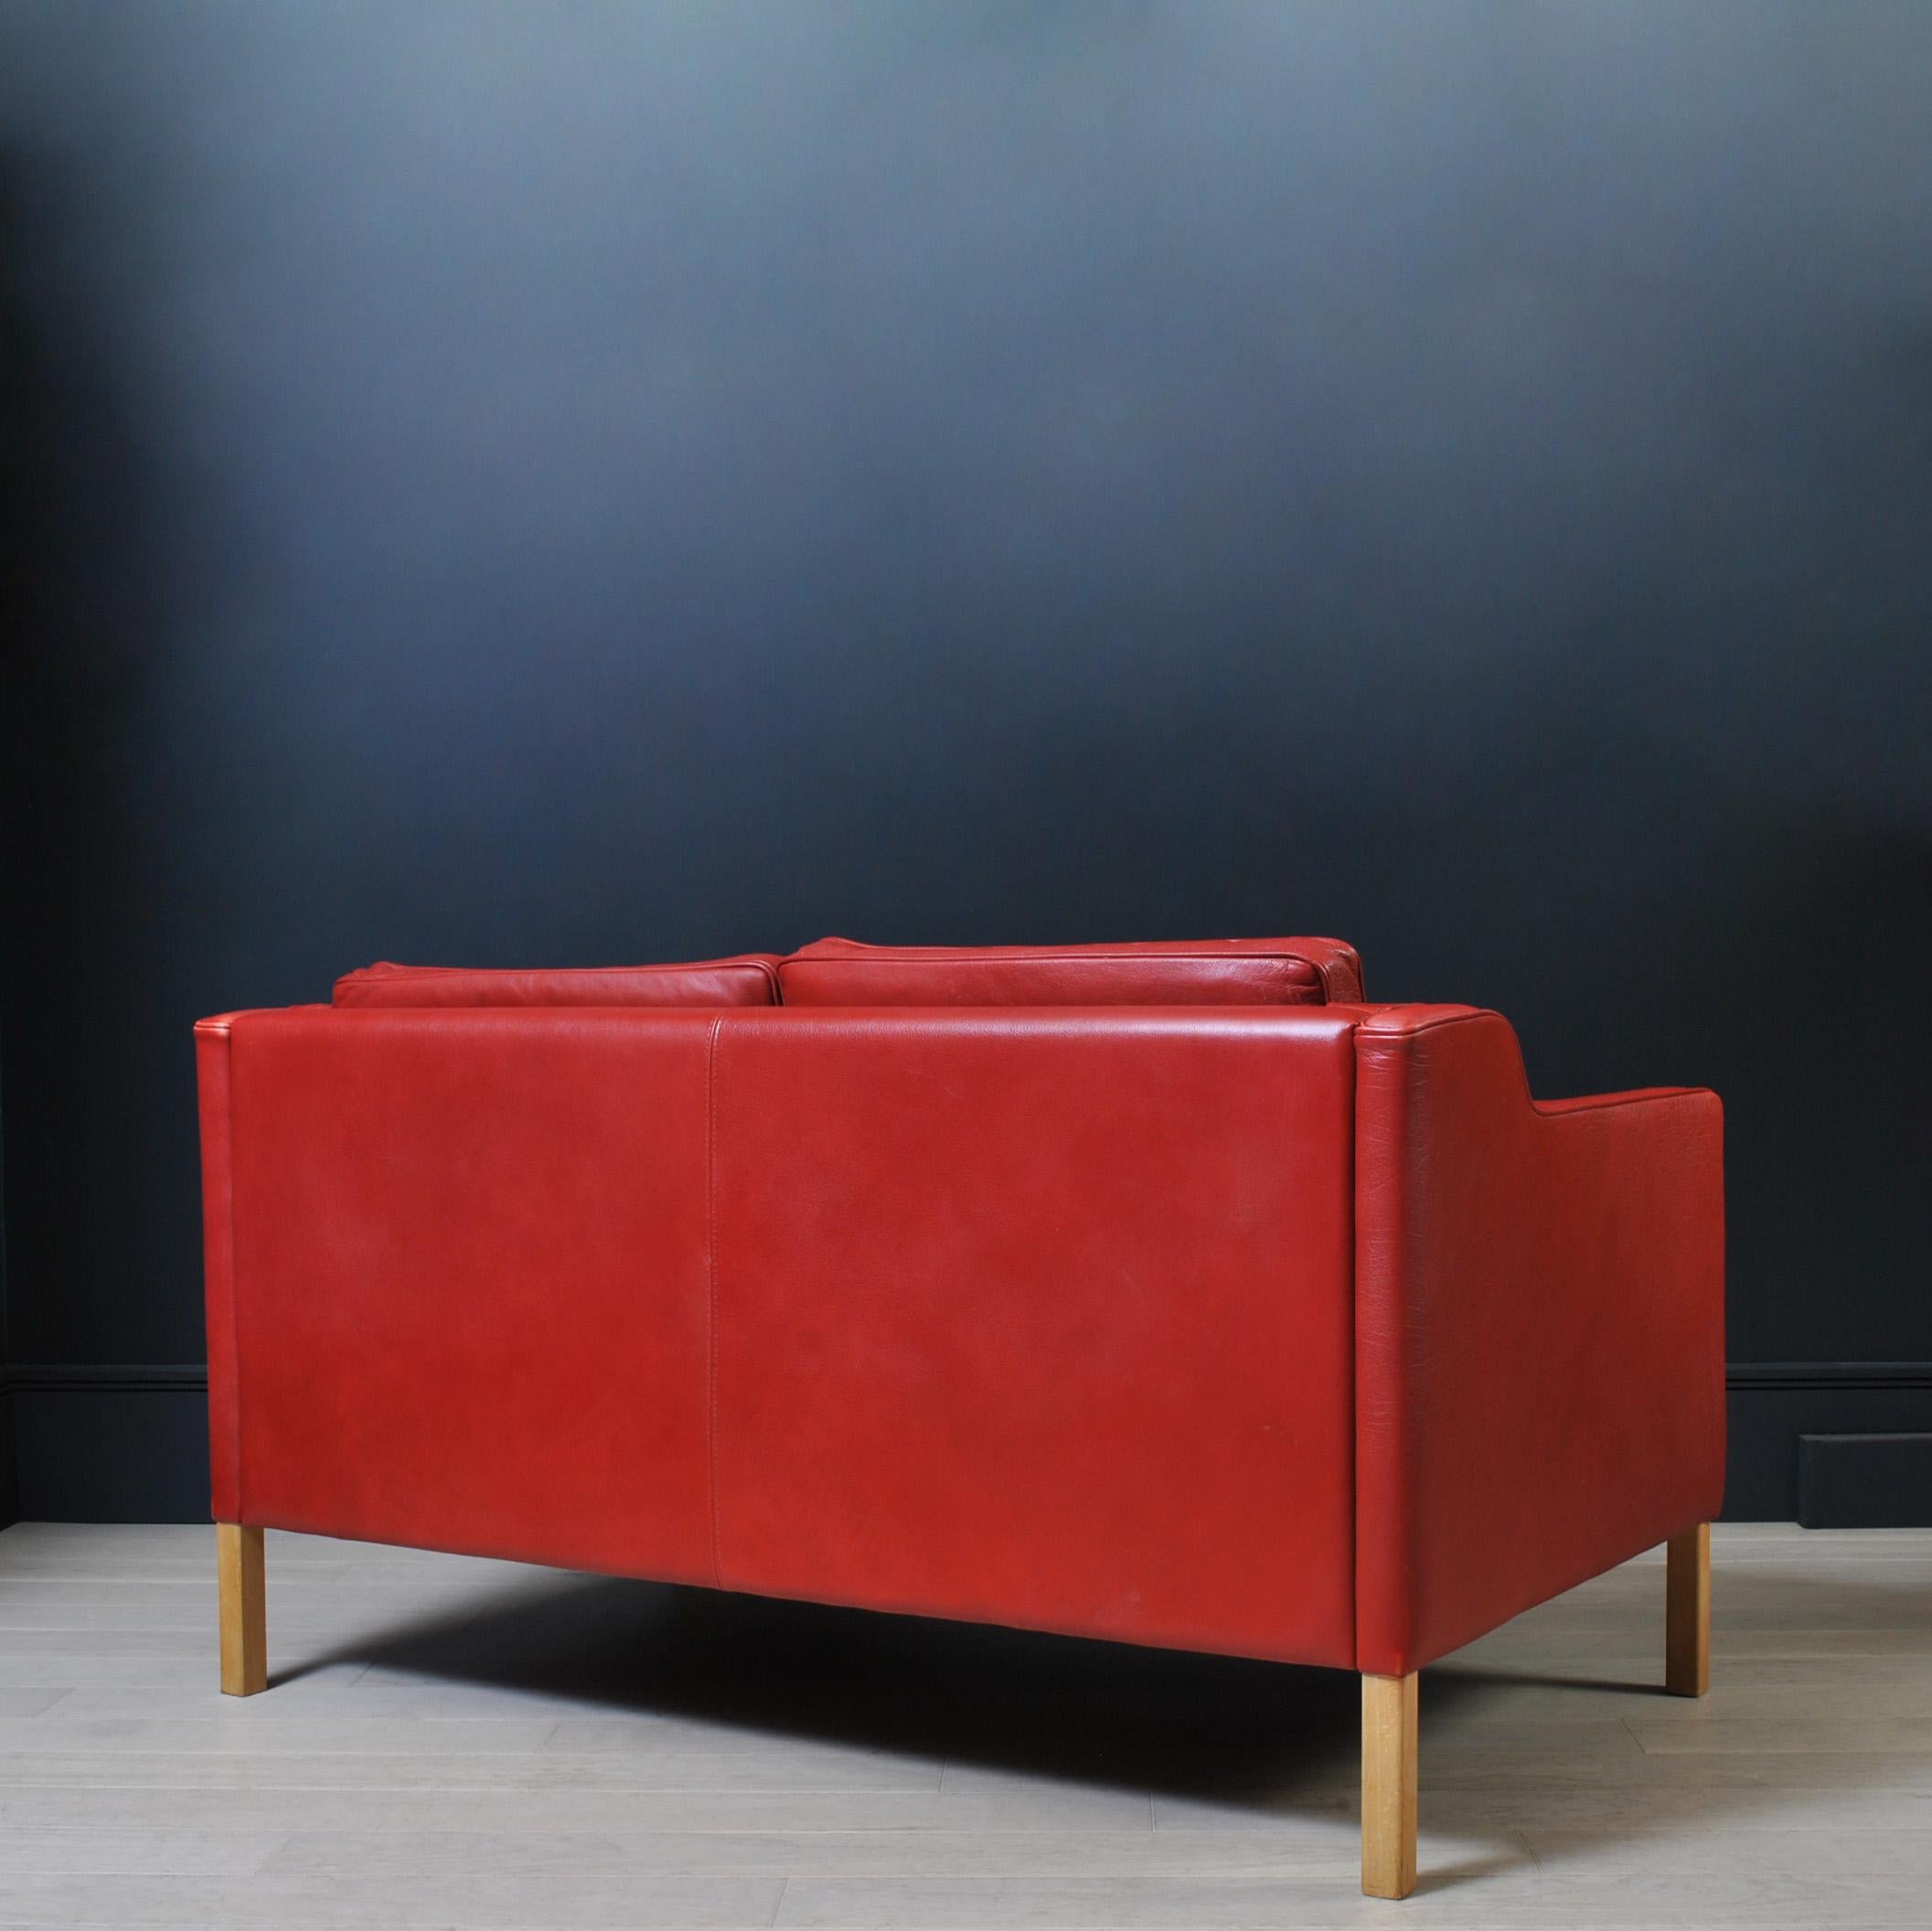 A classic Danish design by Stouby. Incredibly comfortable. Thick and soft leather.
